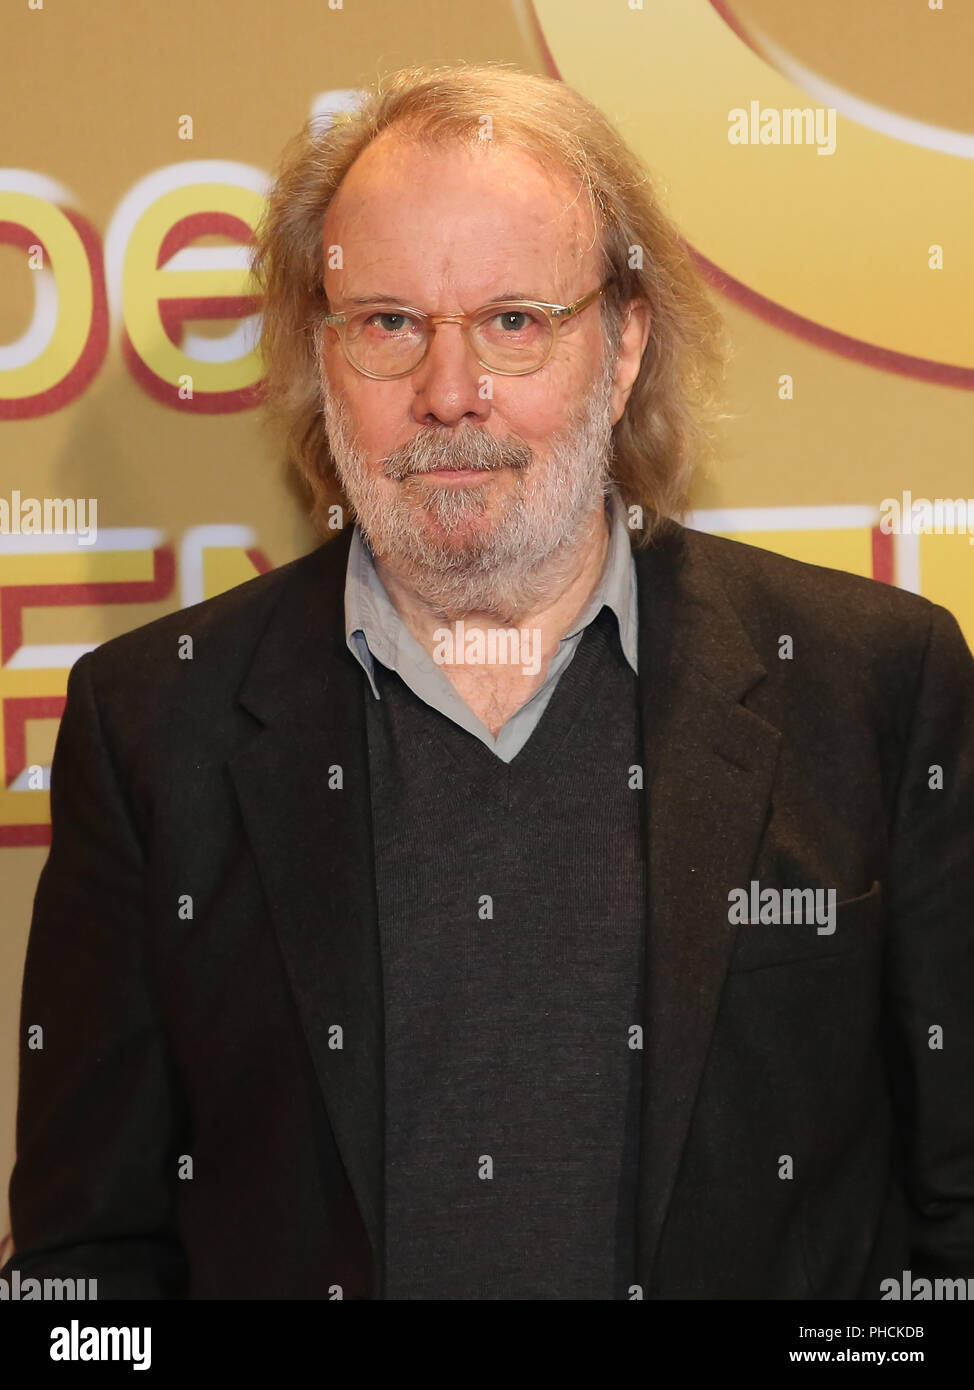 Benny Andersson (ABBA) Stockfoto